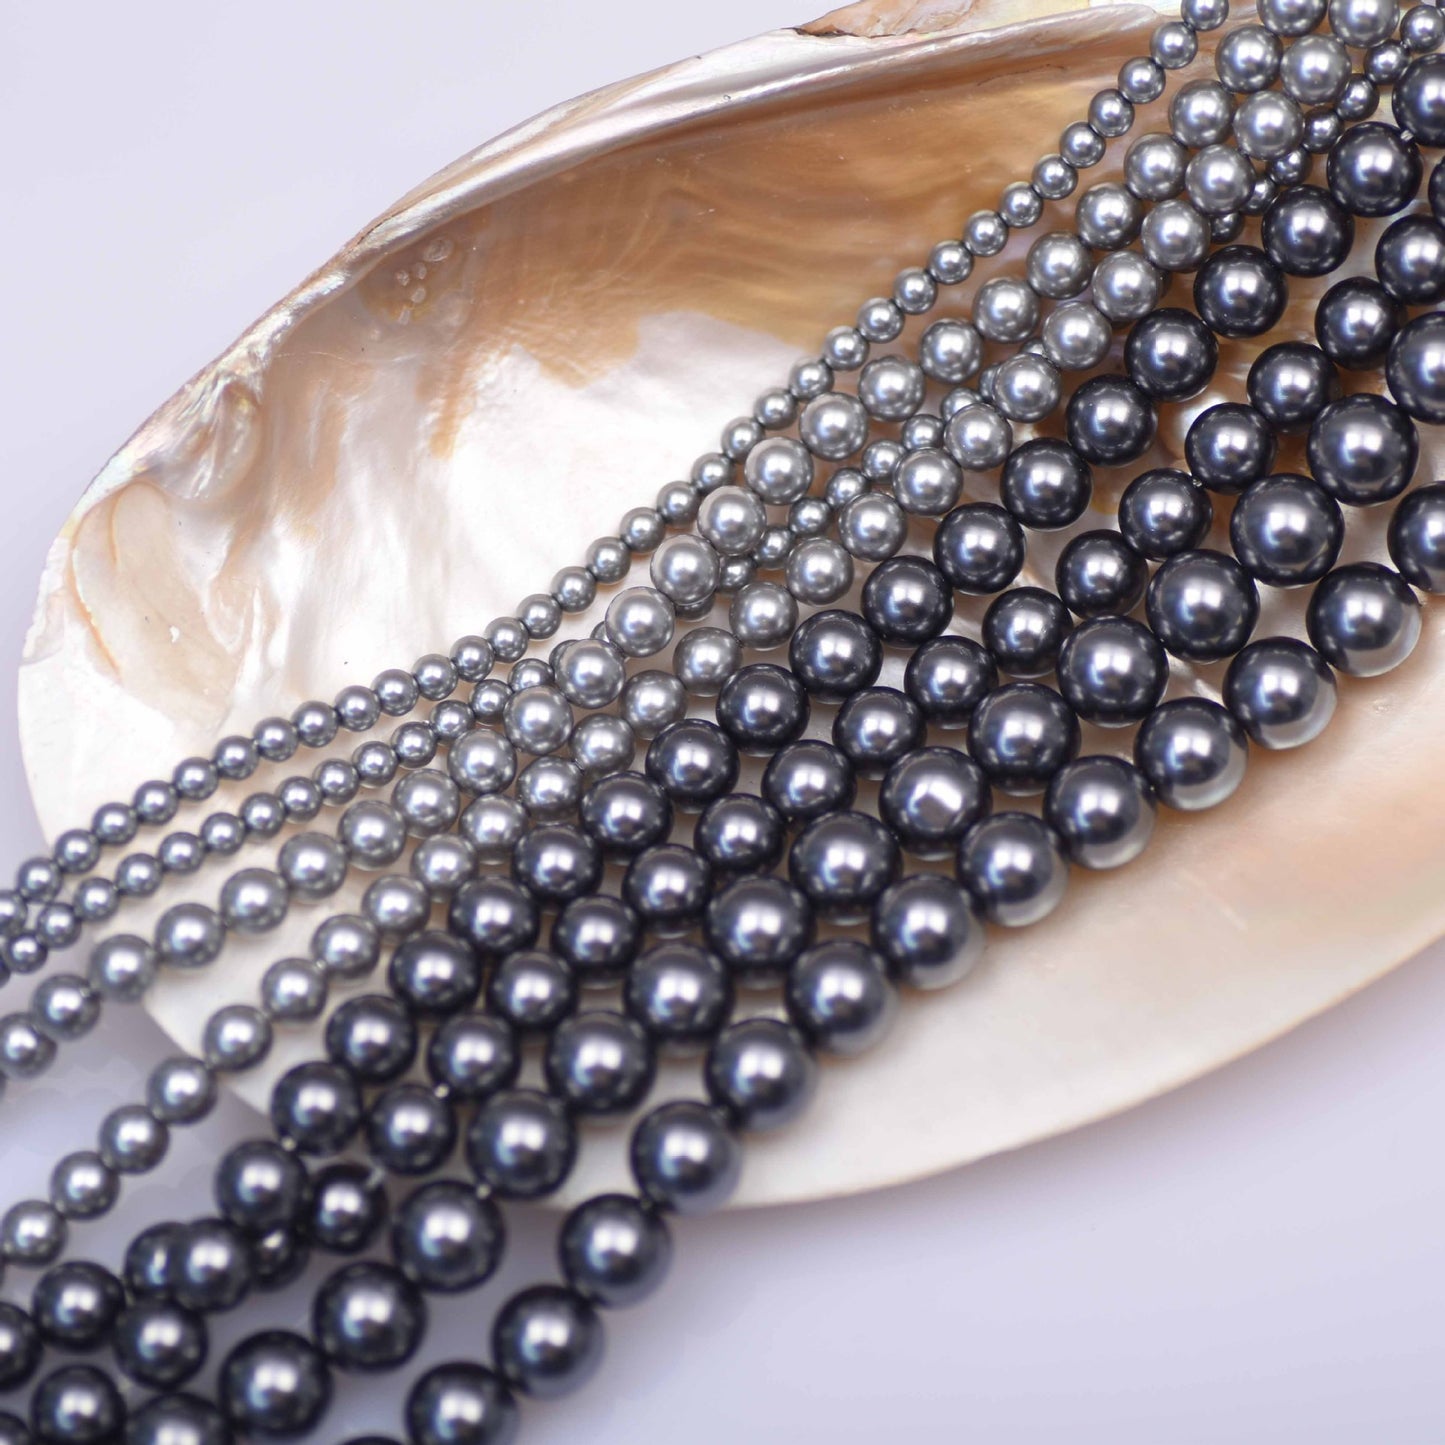 Loose Silver Glass Pearl Beads